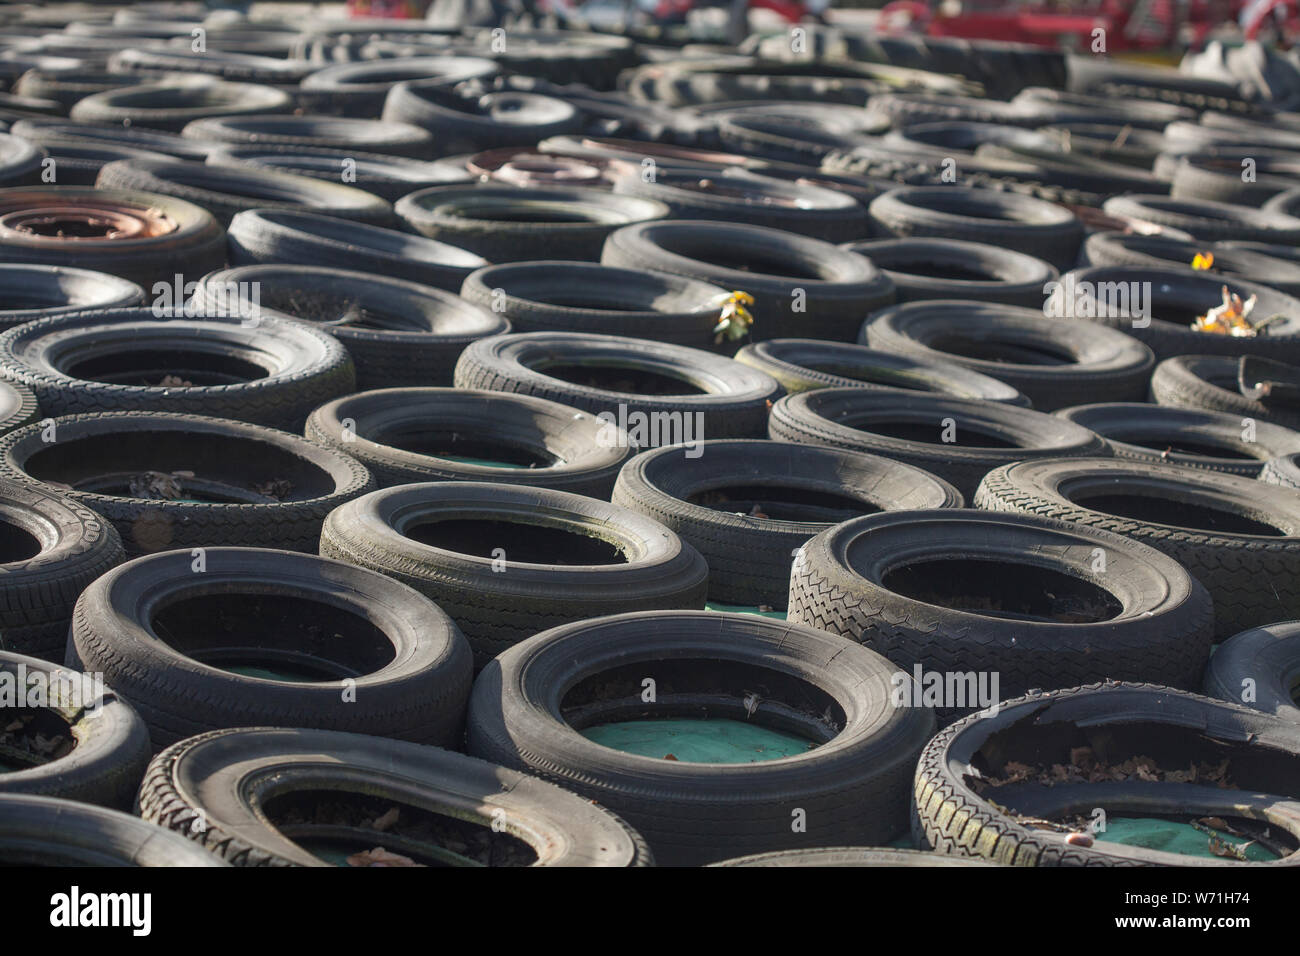 Old piled up car tires, background picture, Germany Stock Photo